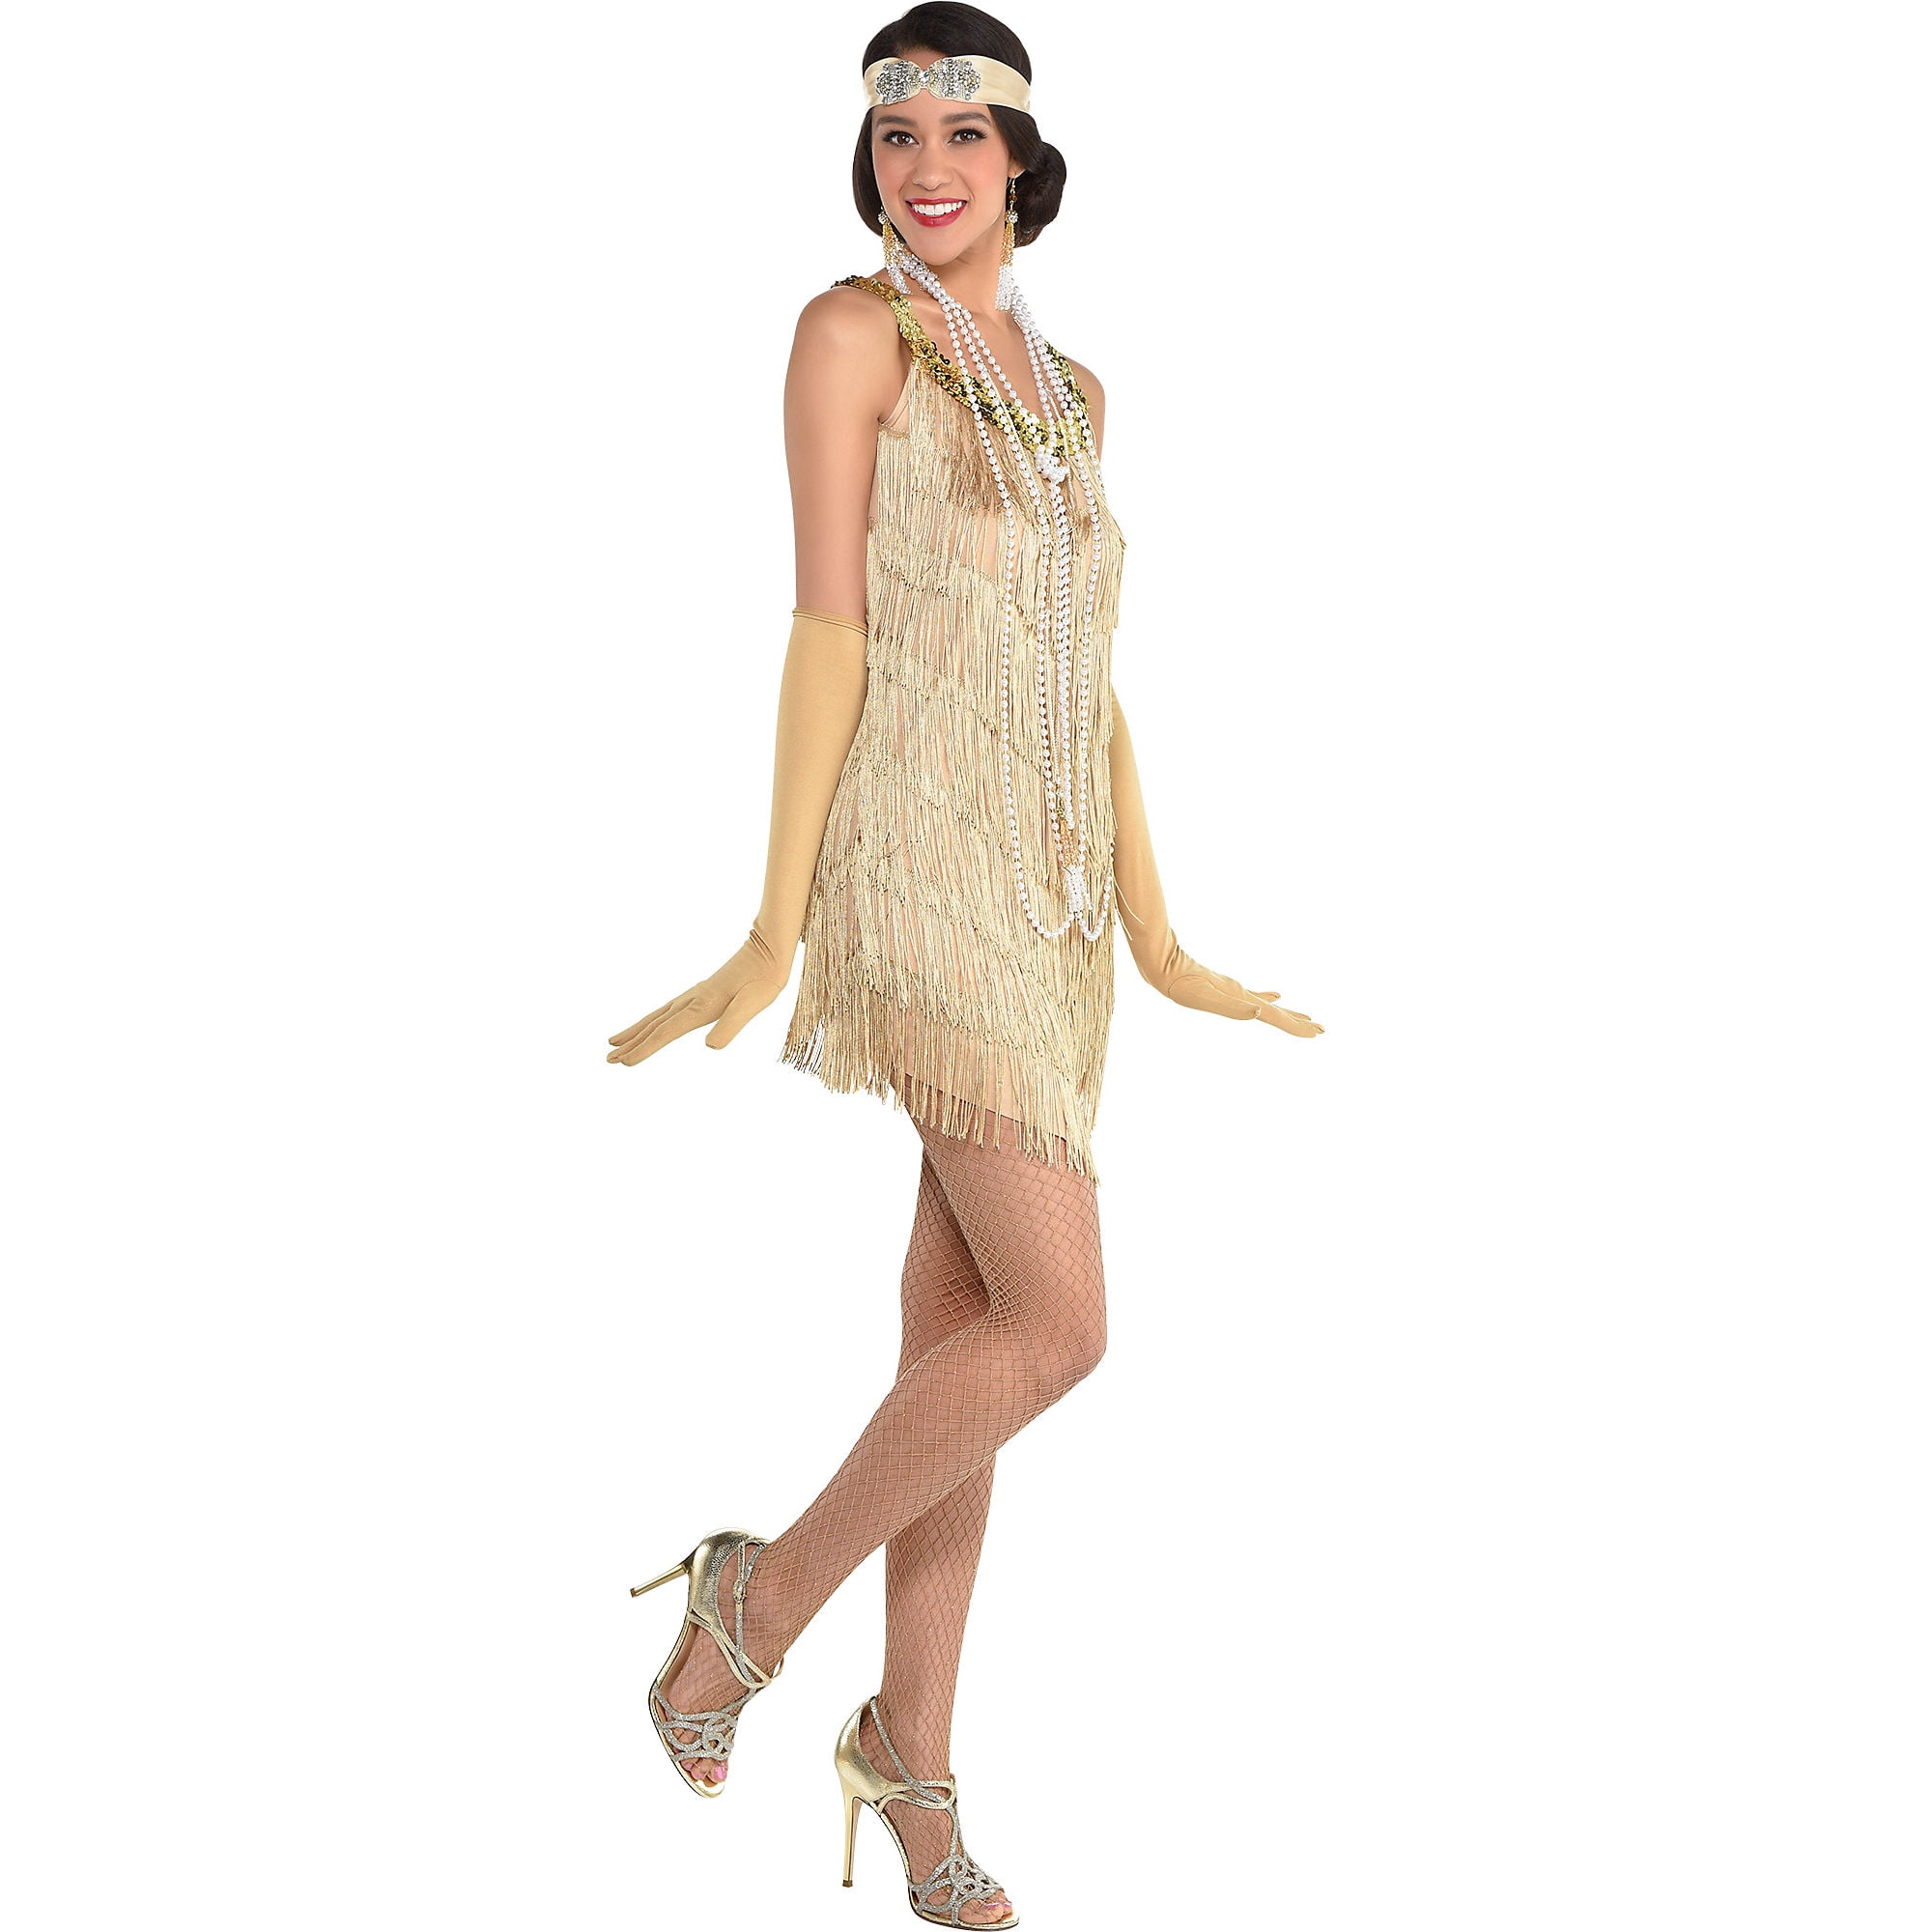 LVOW Women 1920s Tassels Straps Dress Gatsby Cocktail Party Fringed Costume Flapper Dresses with Headband